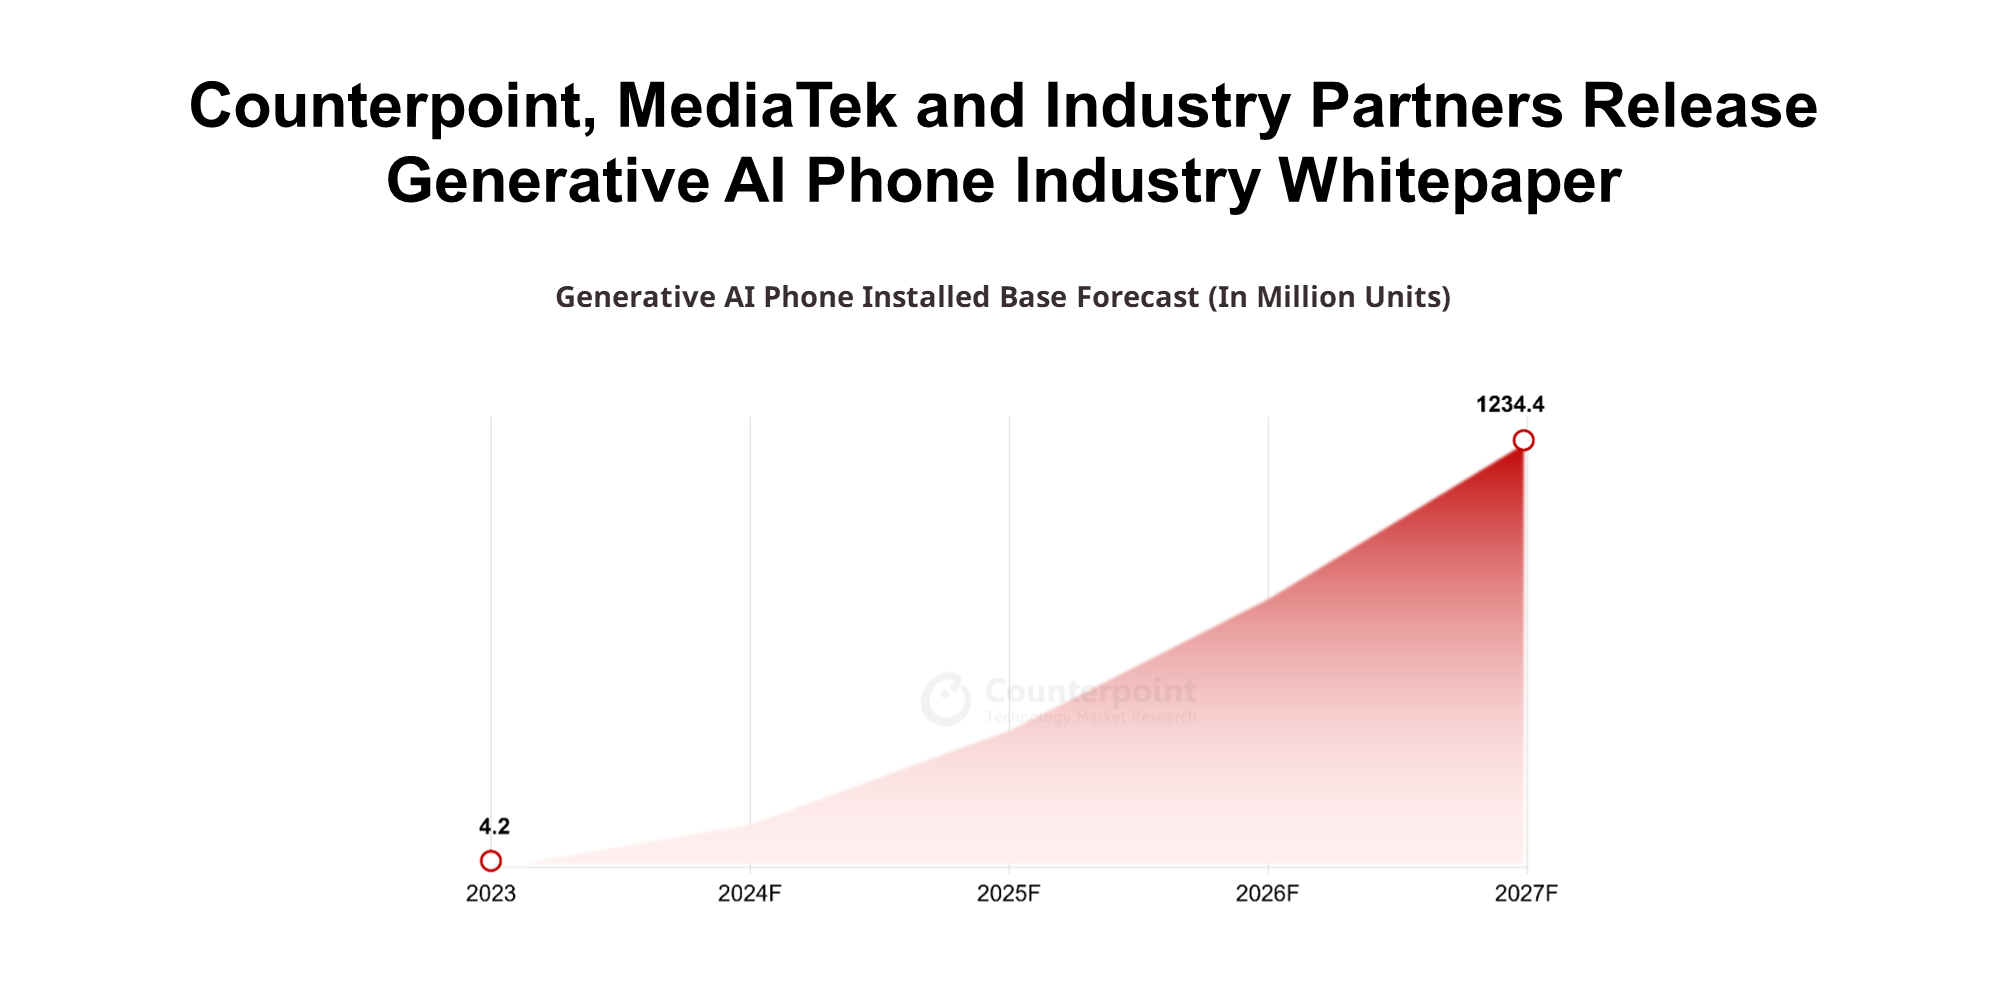 Counterpoint, MediaTek and Industry Partners Release Generative AI Phone Industry Whitepaper